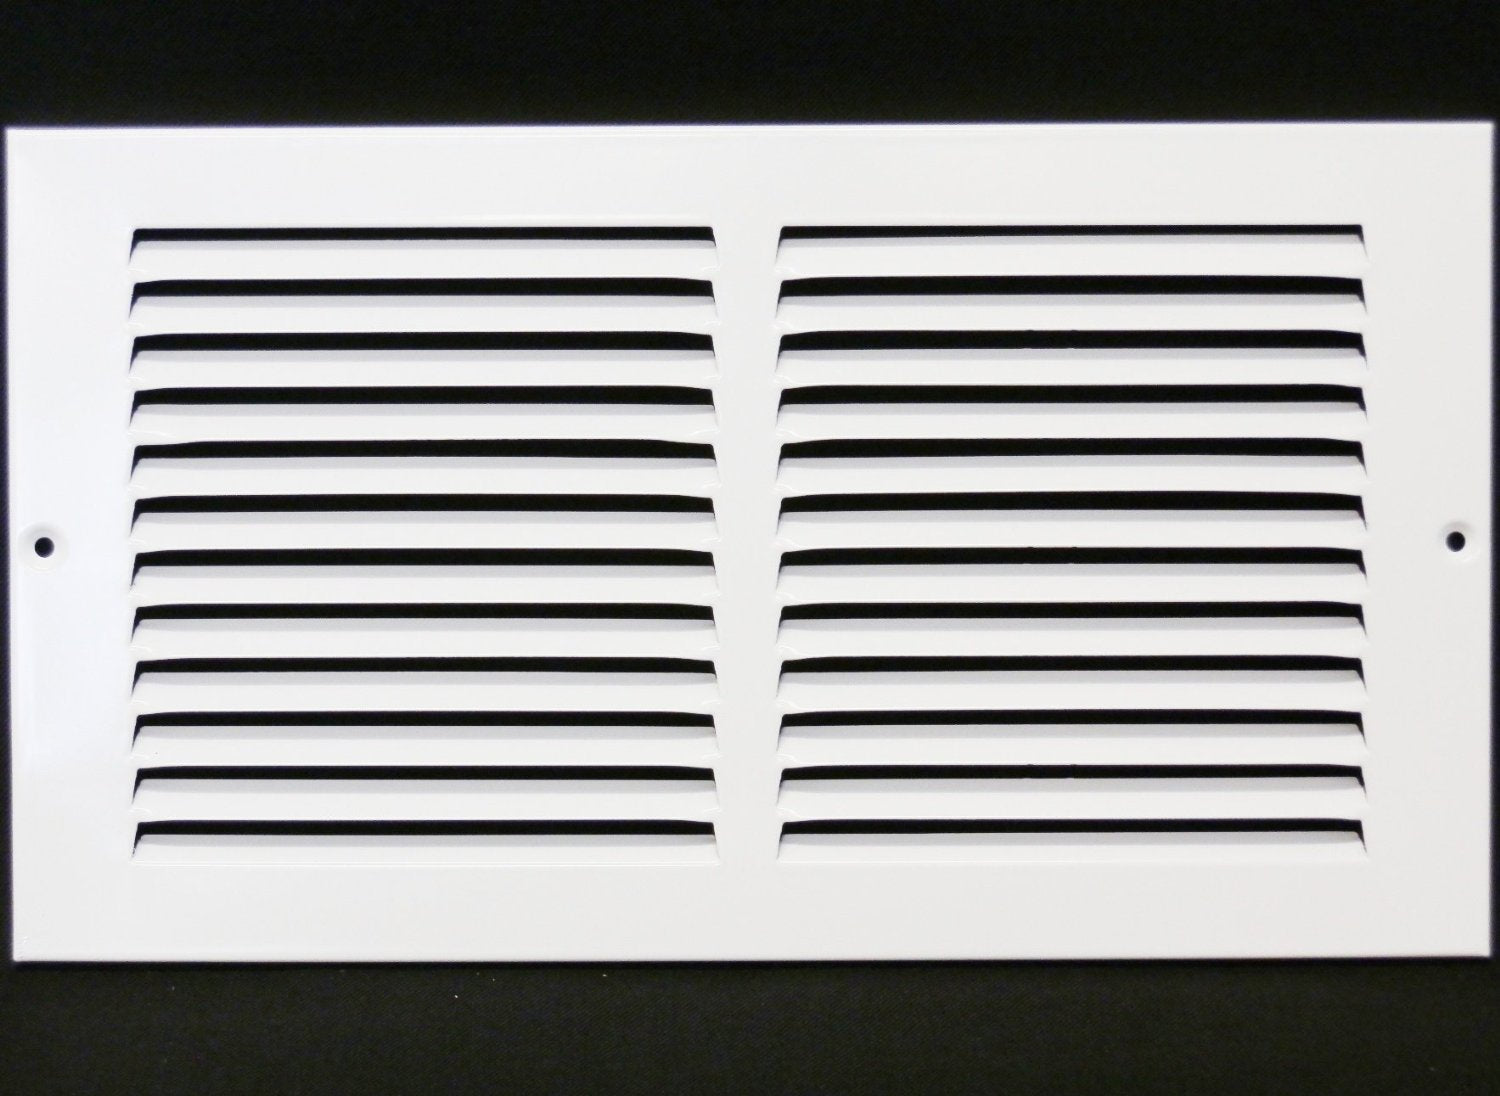 16" X 4" Air Vent Return Grilles - Sidewall and Ceiling - Steel